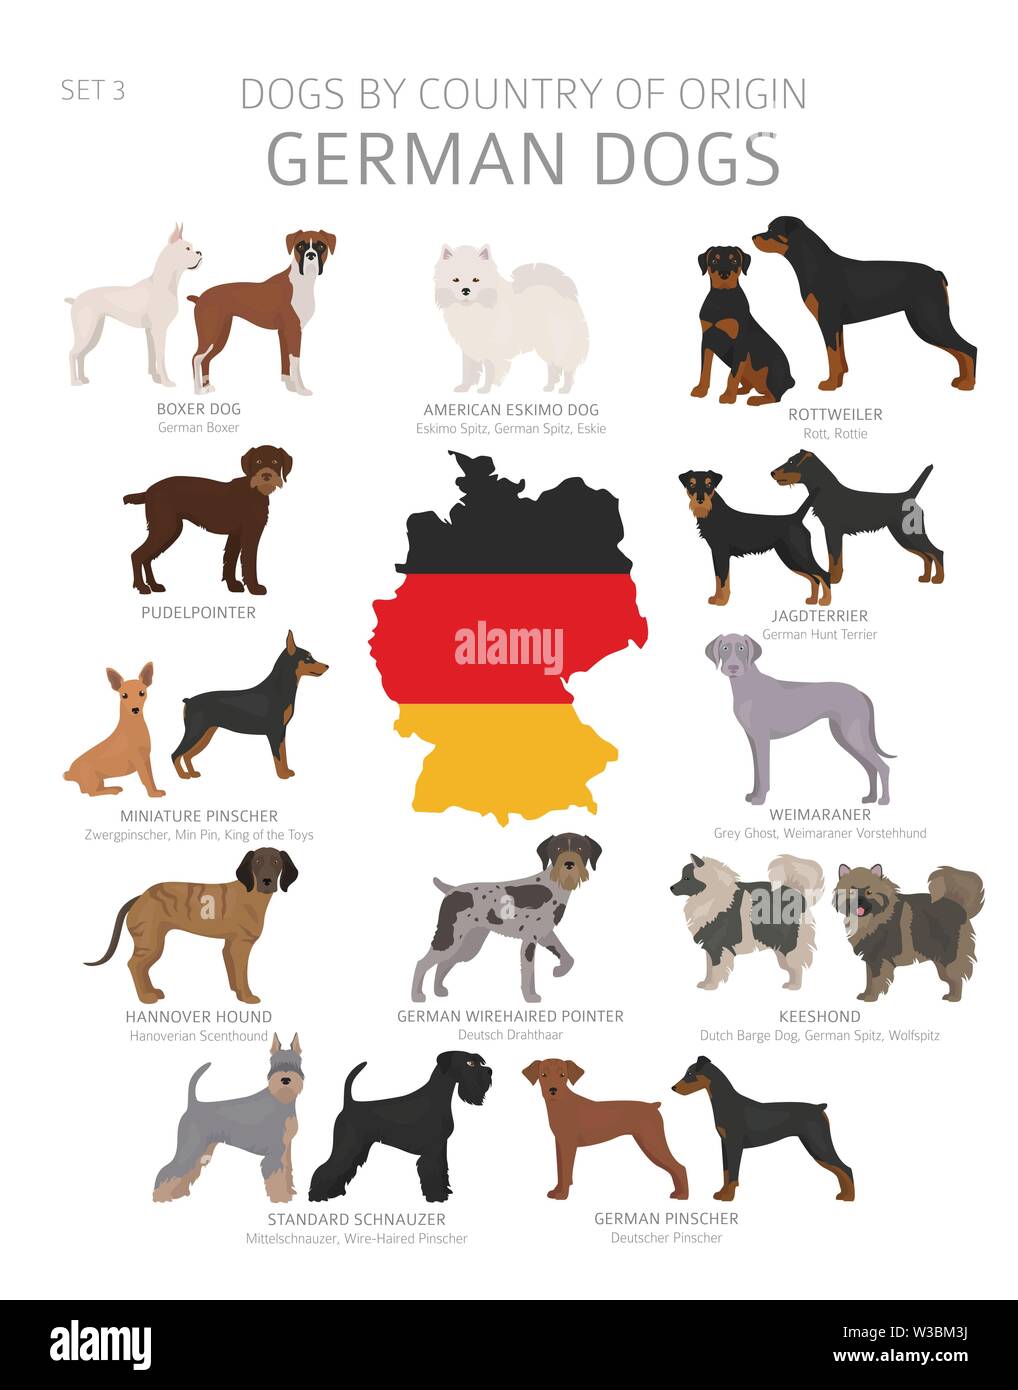 Dogs by country of origin. German dog breeds. Shepherds, hunting, herding, toy, working and service dogs  set.  Vector illustration Stock Vector